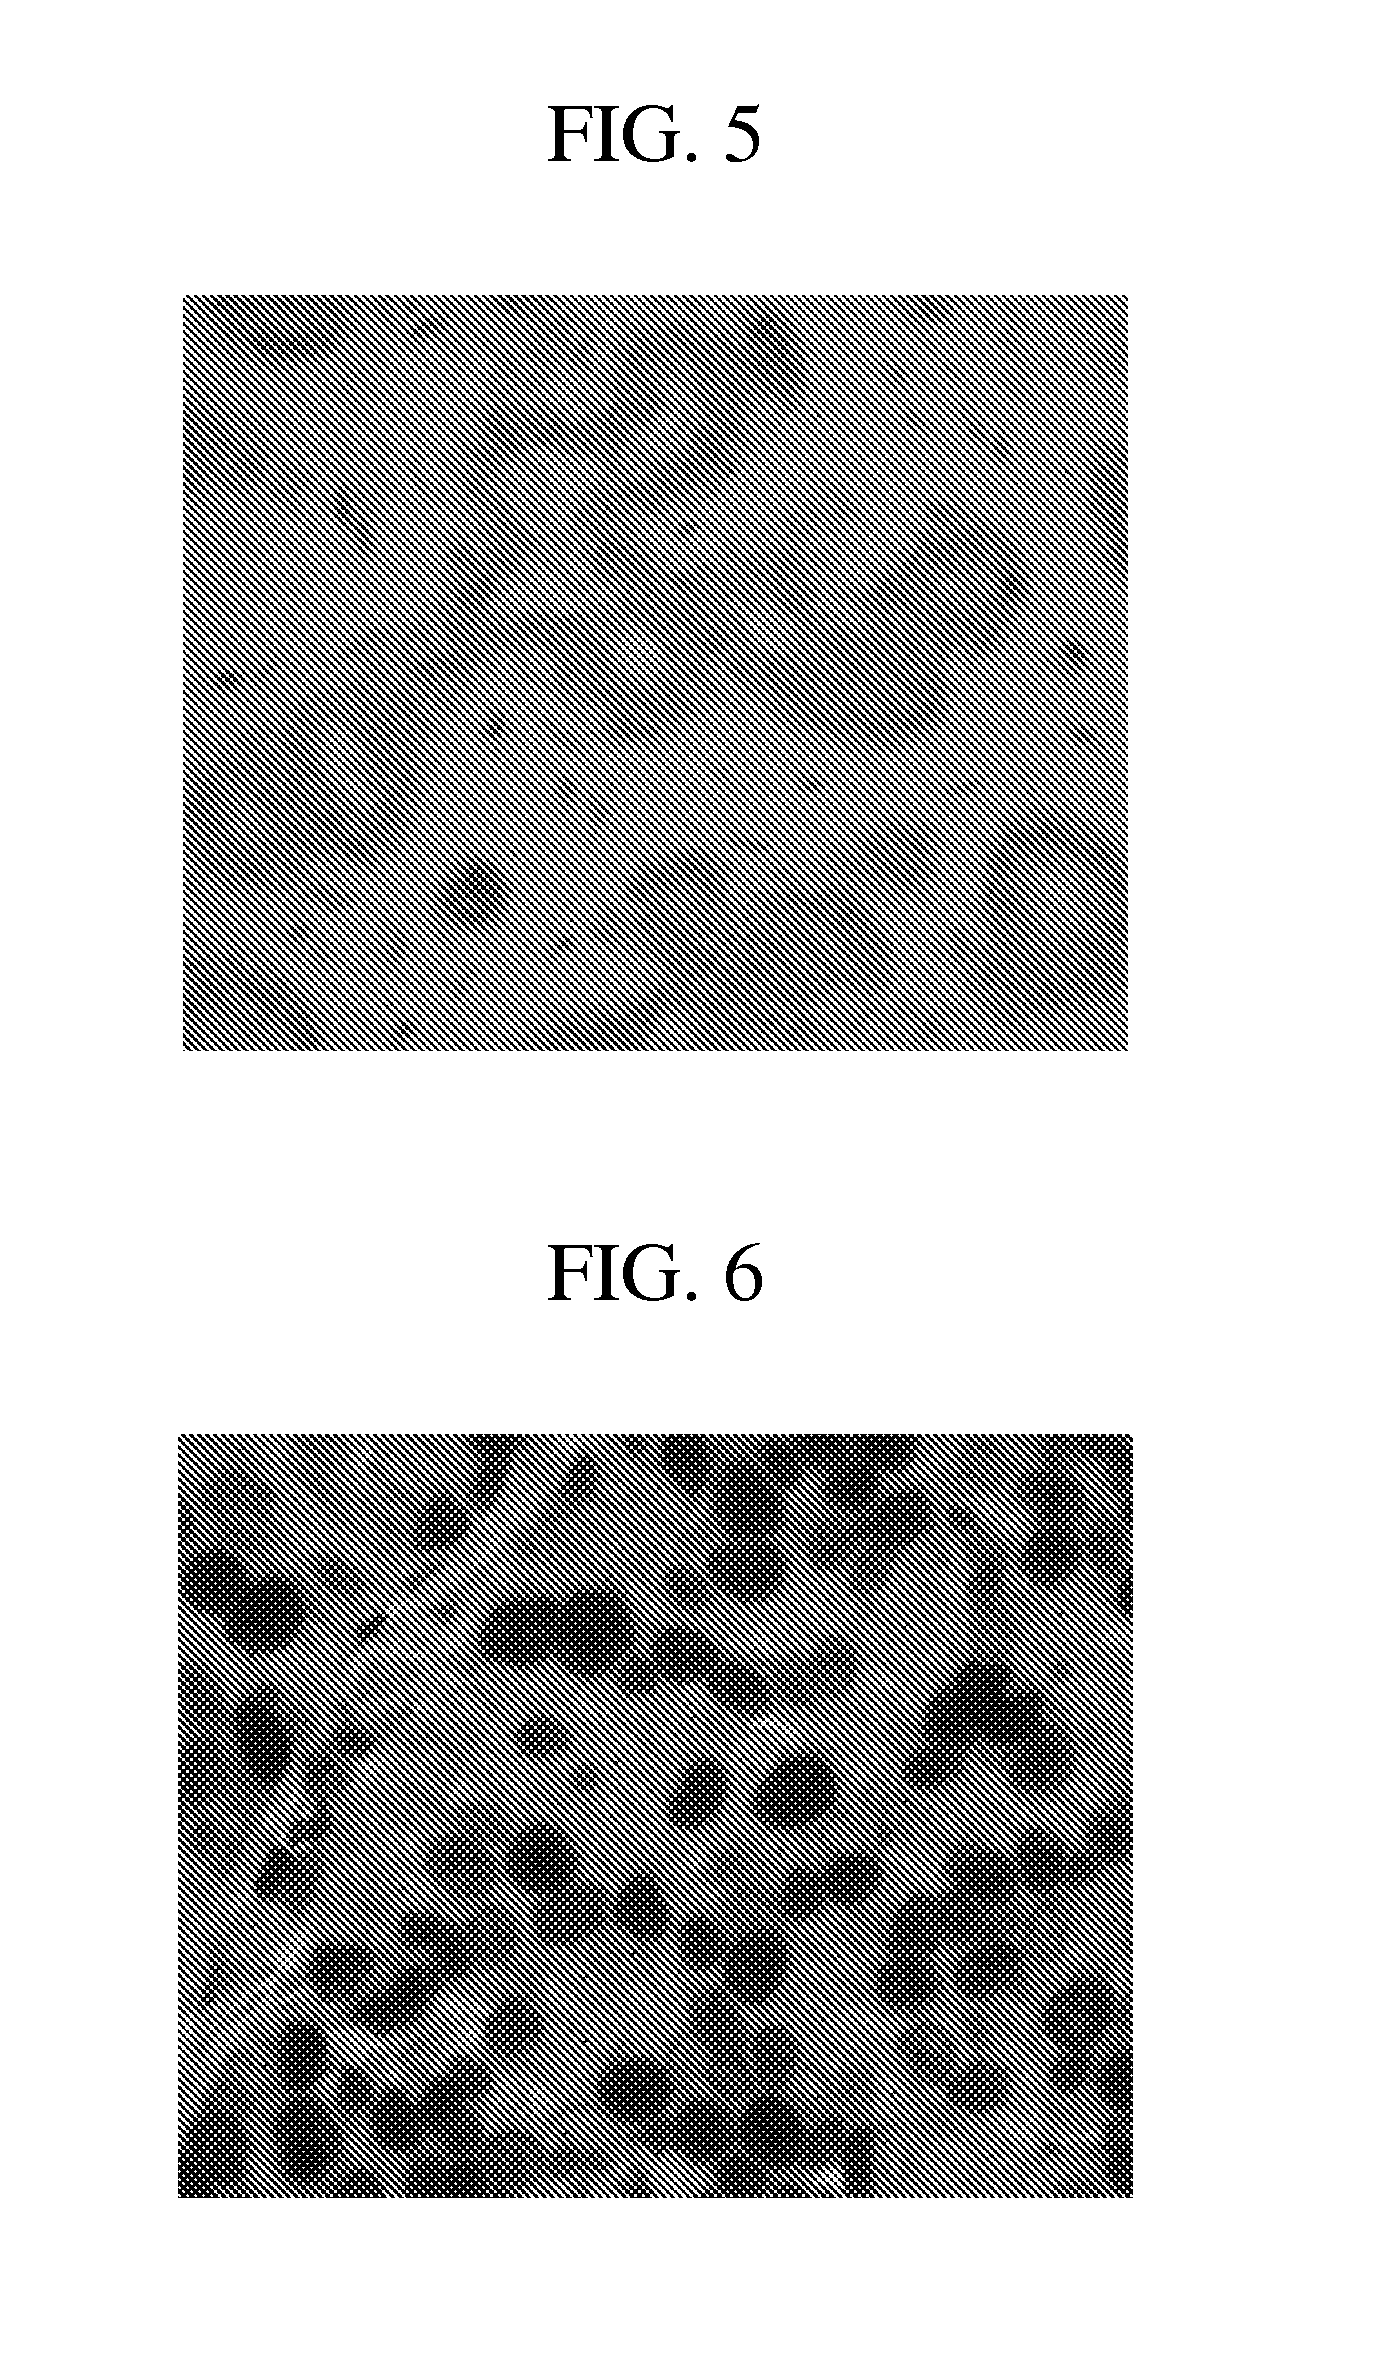 Method for chromogenic detection of two or more target molecules in a single sample